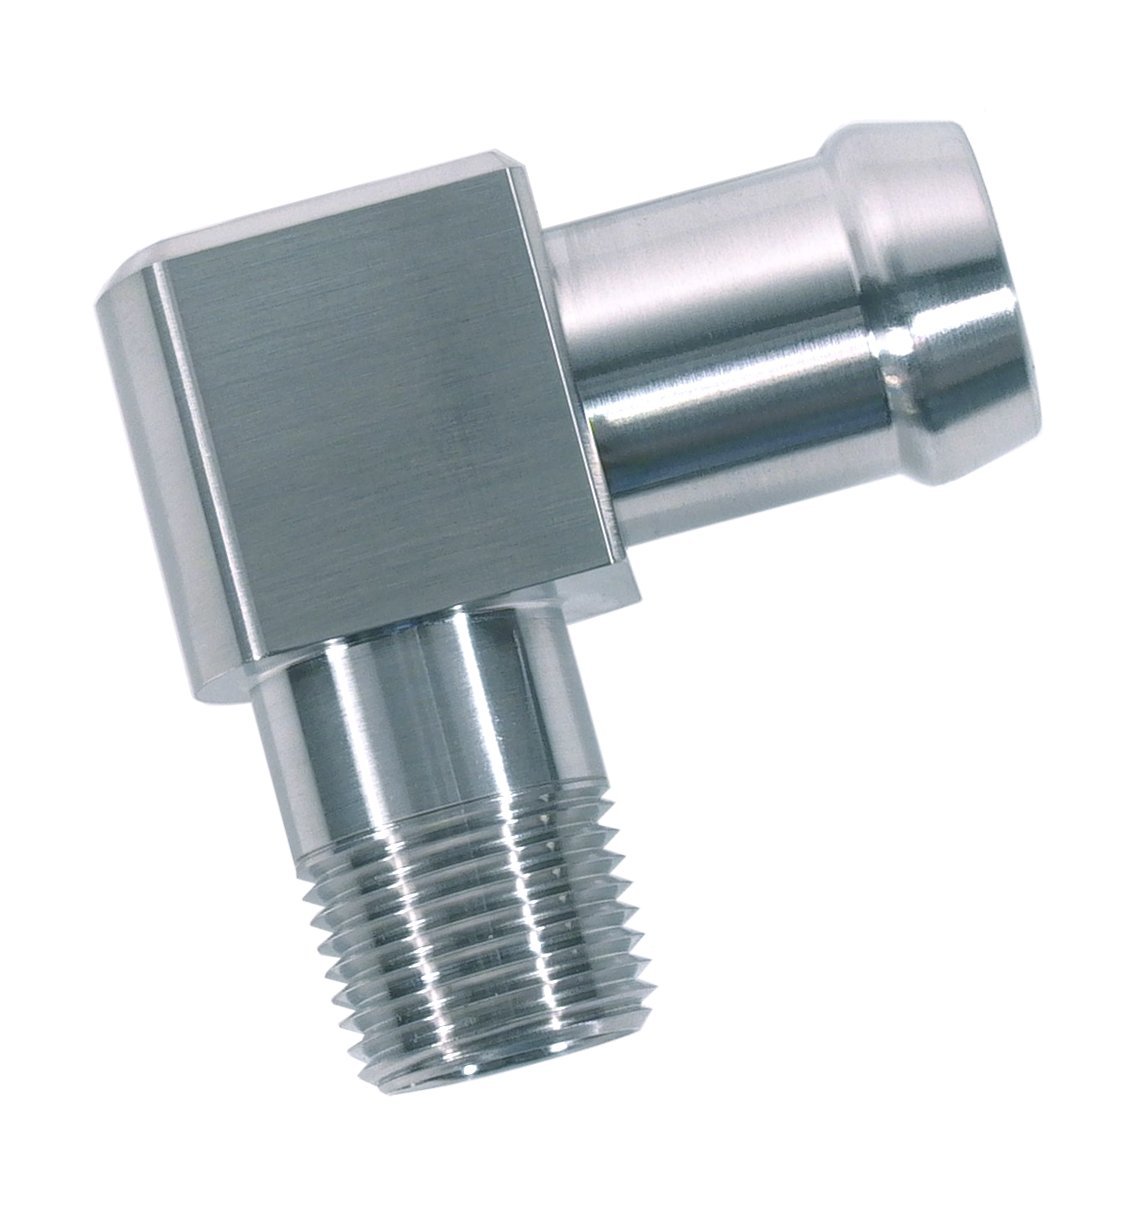 Heater Hose Fitting, 90-Degree, 3/8 in. NPT x 5/8 in. Hose Barb, 1 3/4 in. Length [Polished Finish]